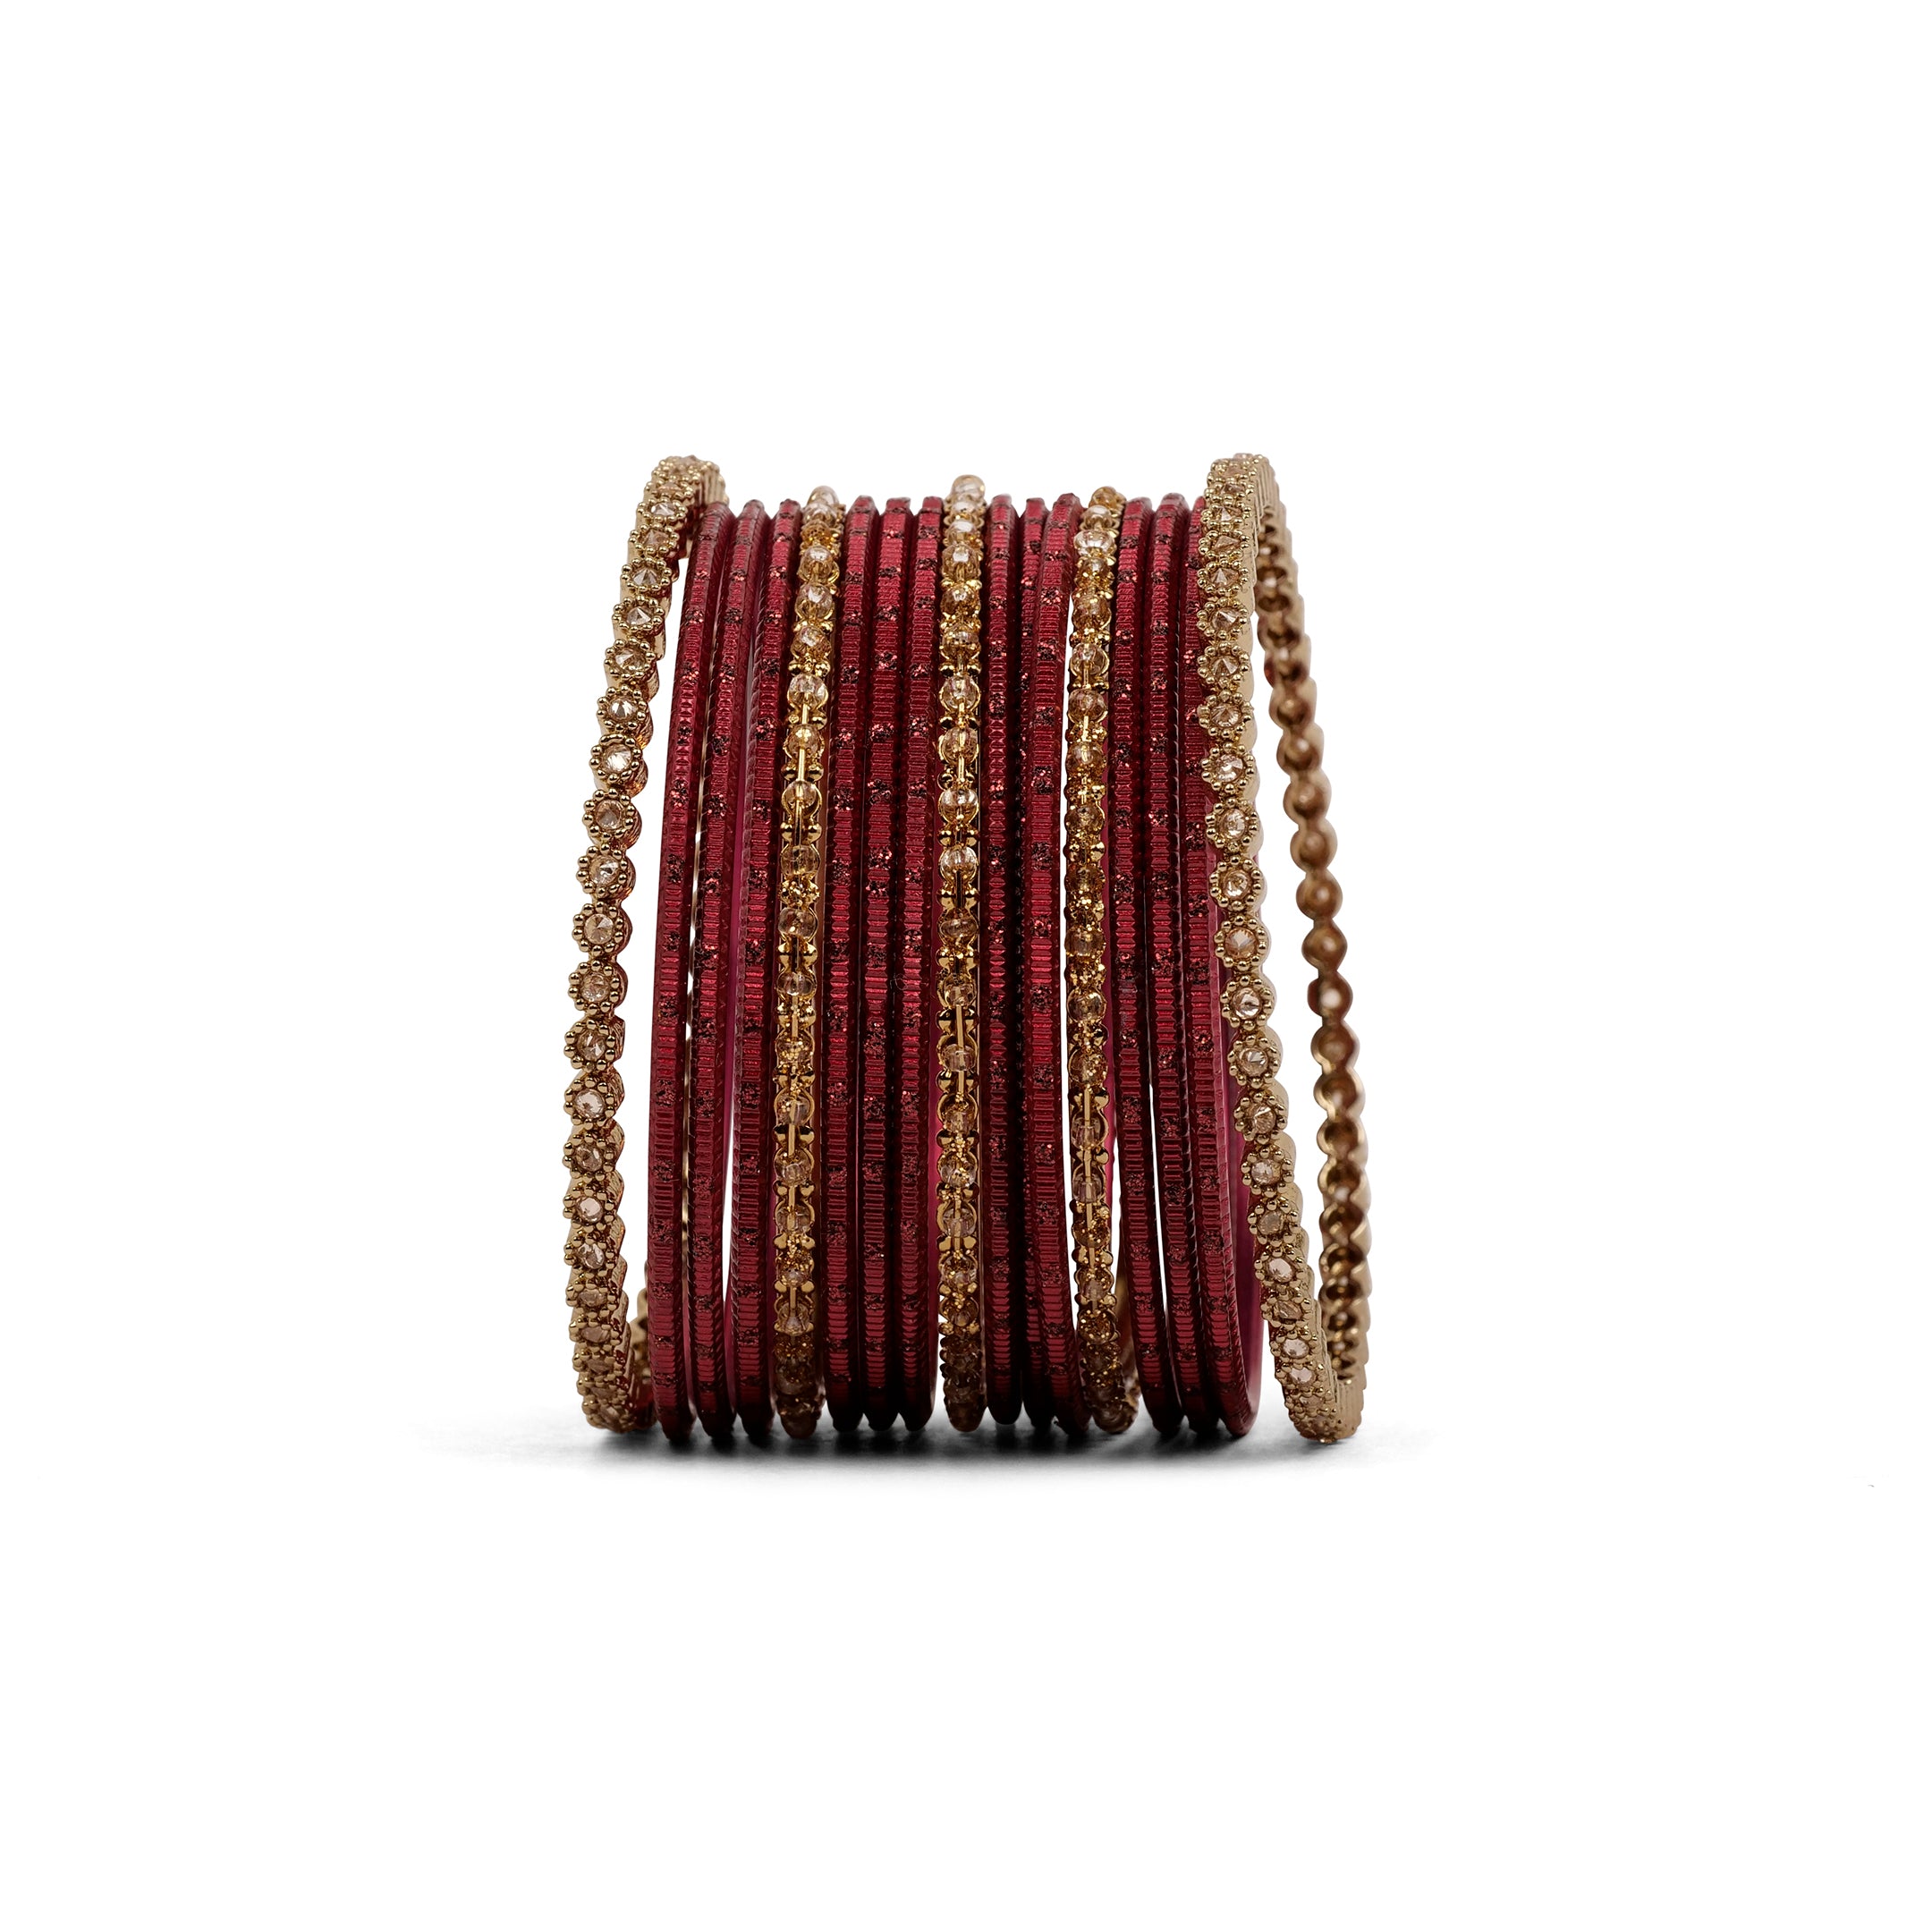 Timeless Antique and Maroon Bangle Set